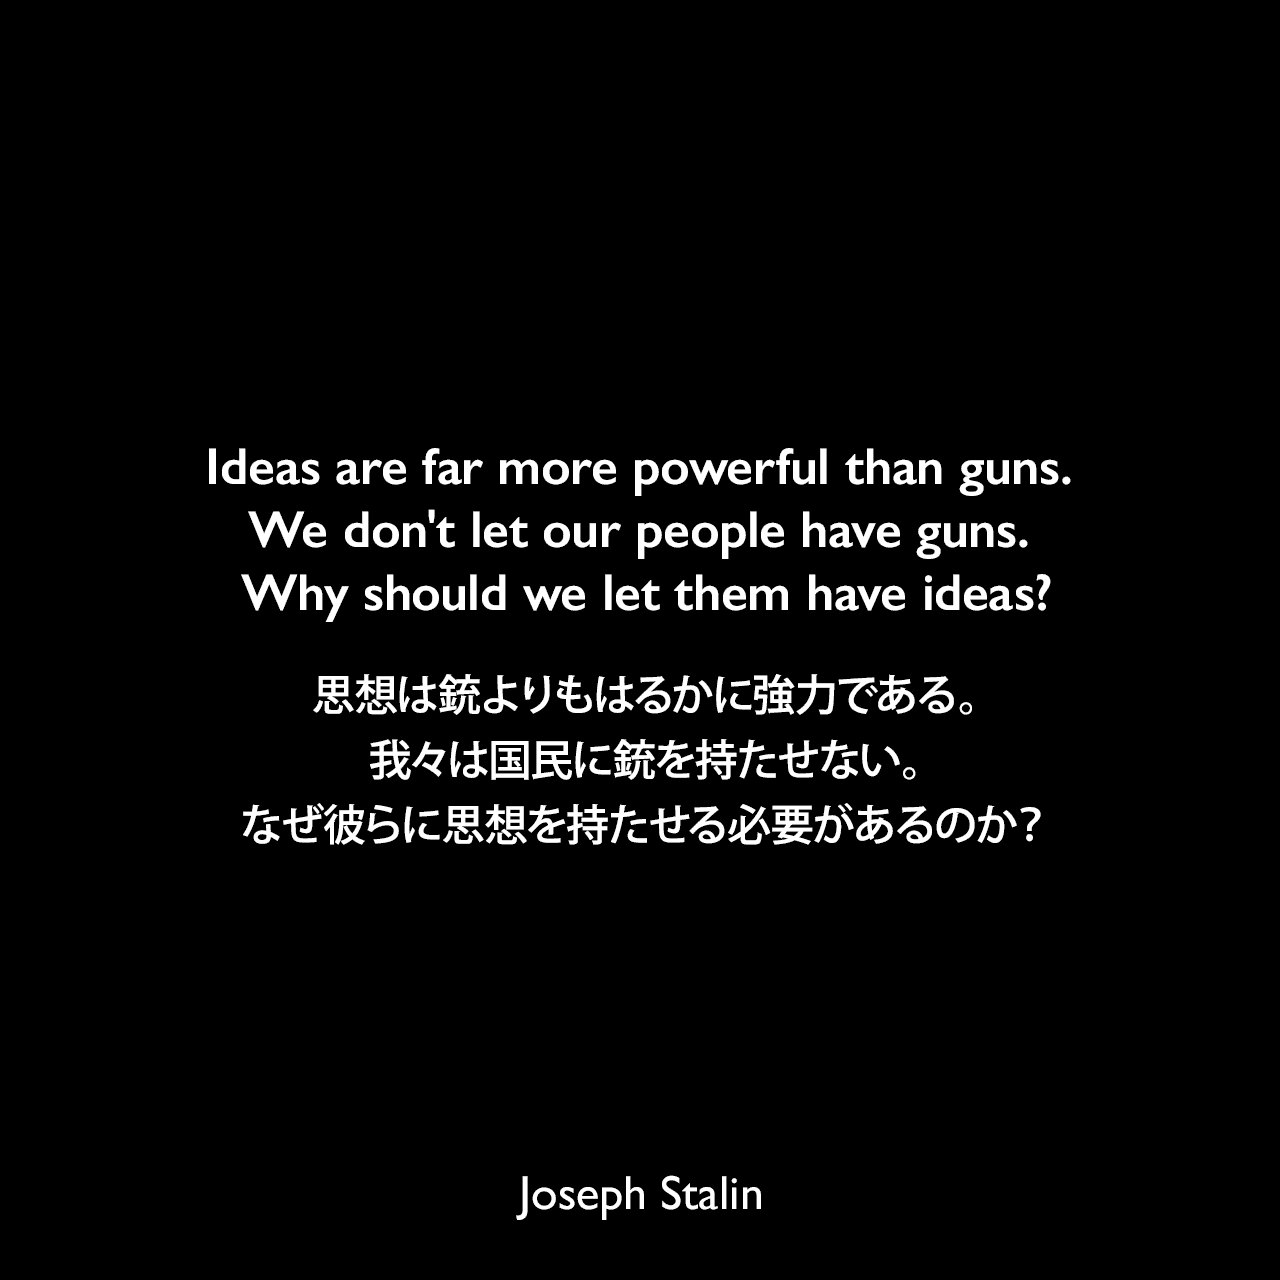 Ideas are far more powerful than guns. We don't let our people have guns. Why should we let them have ideas?思想は銃よりもはるかに強力である。我々は国民に銃を持たせない。なぜ彼らに思想を持たせる必要があるのか？Joseph Stalin